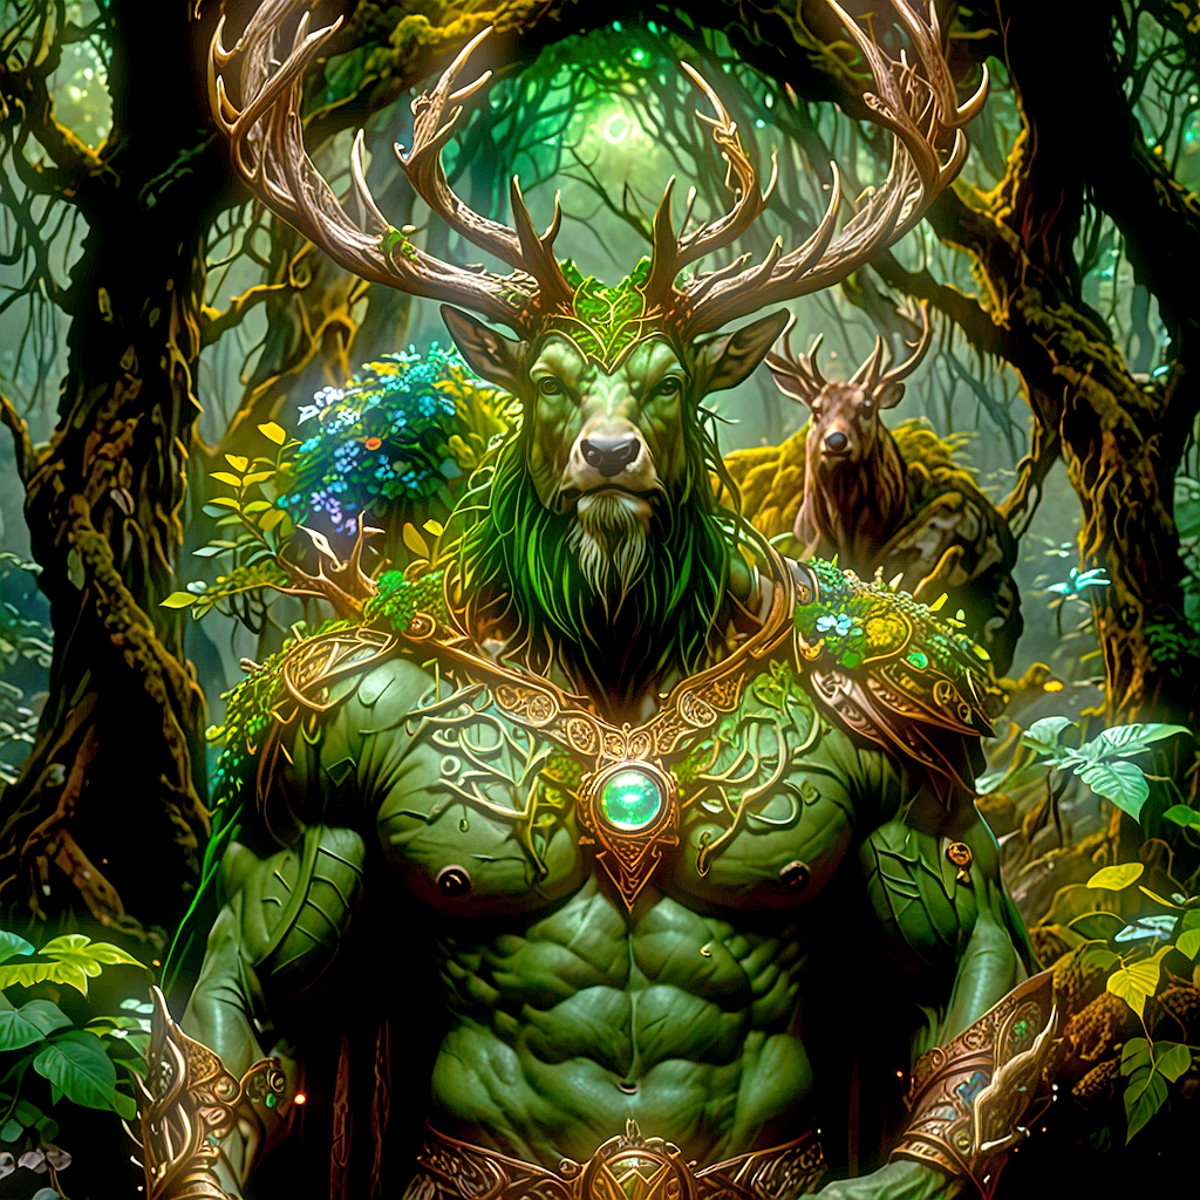 Powerful, mature hybrid man deer with kind, weathered face, green wizard, forest wizard, guardian of the forest and a prot...